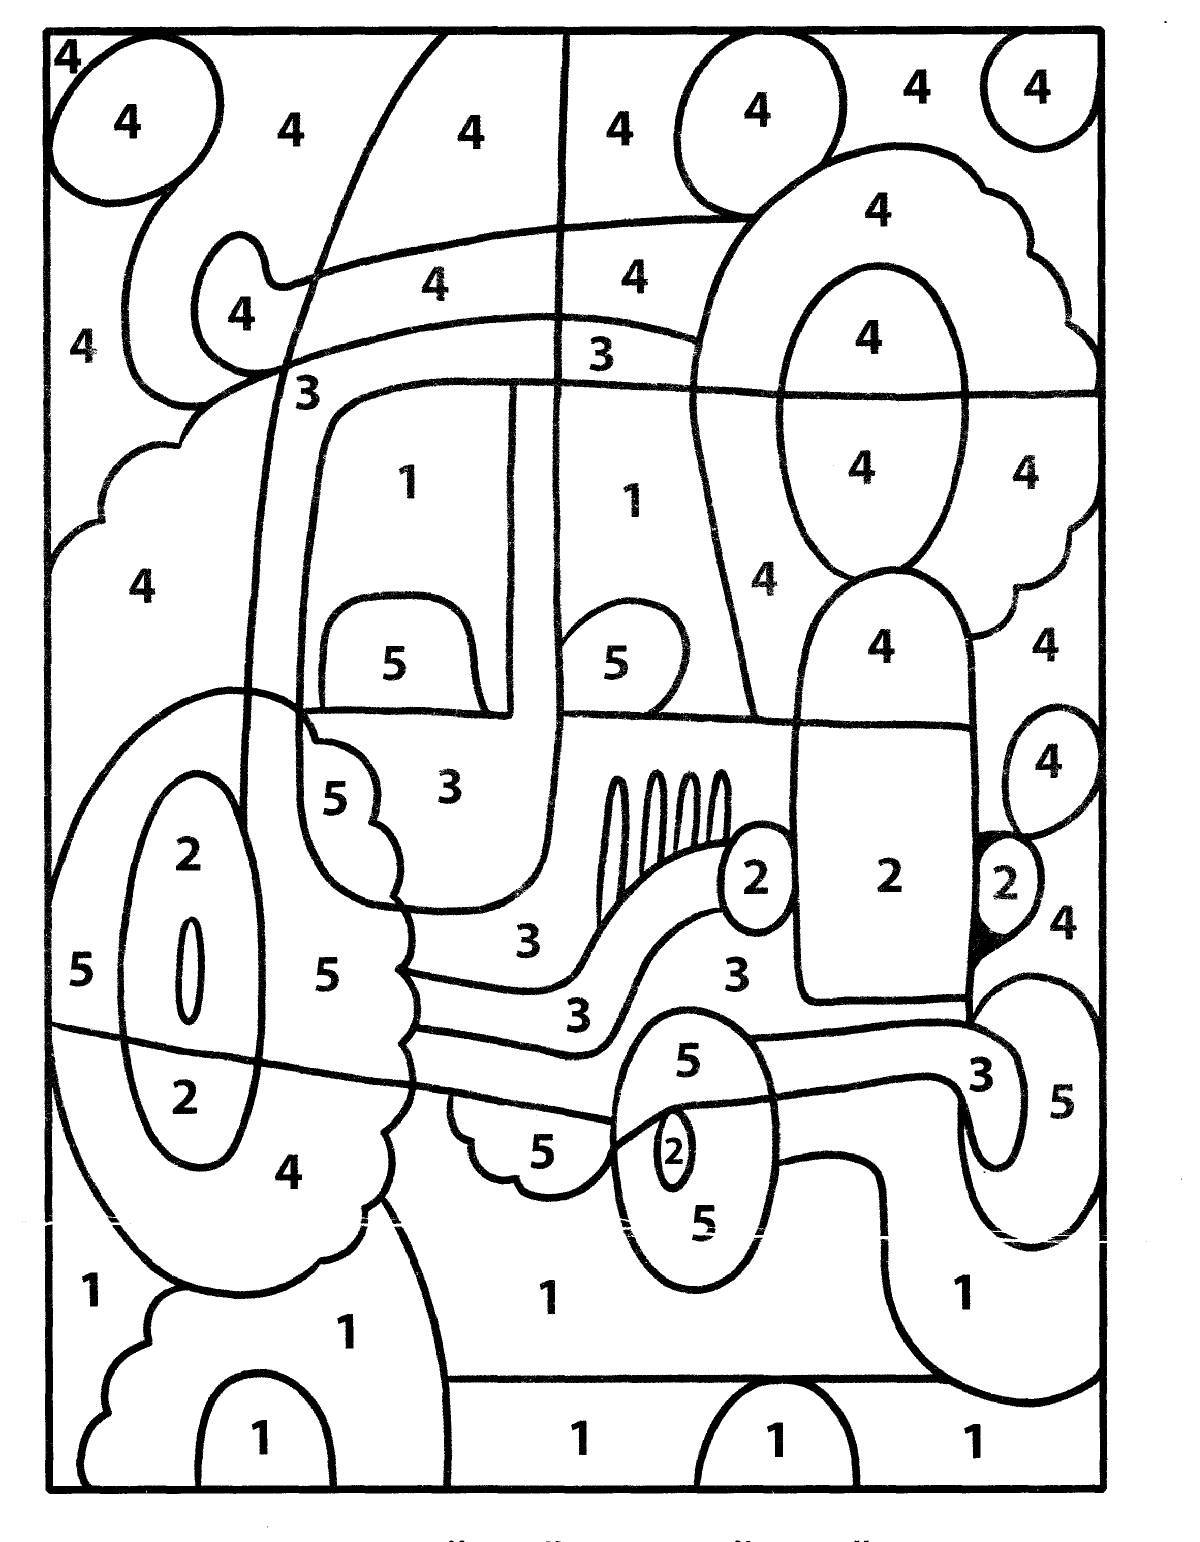 Fun coloring by numbers for 4-5 year olds